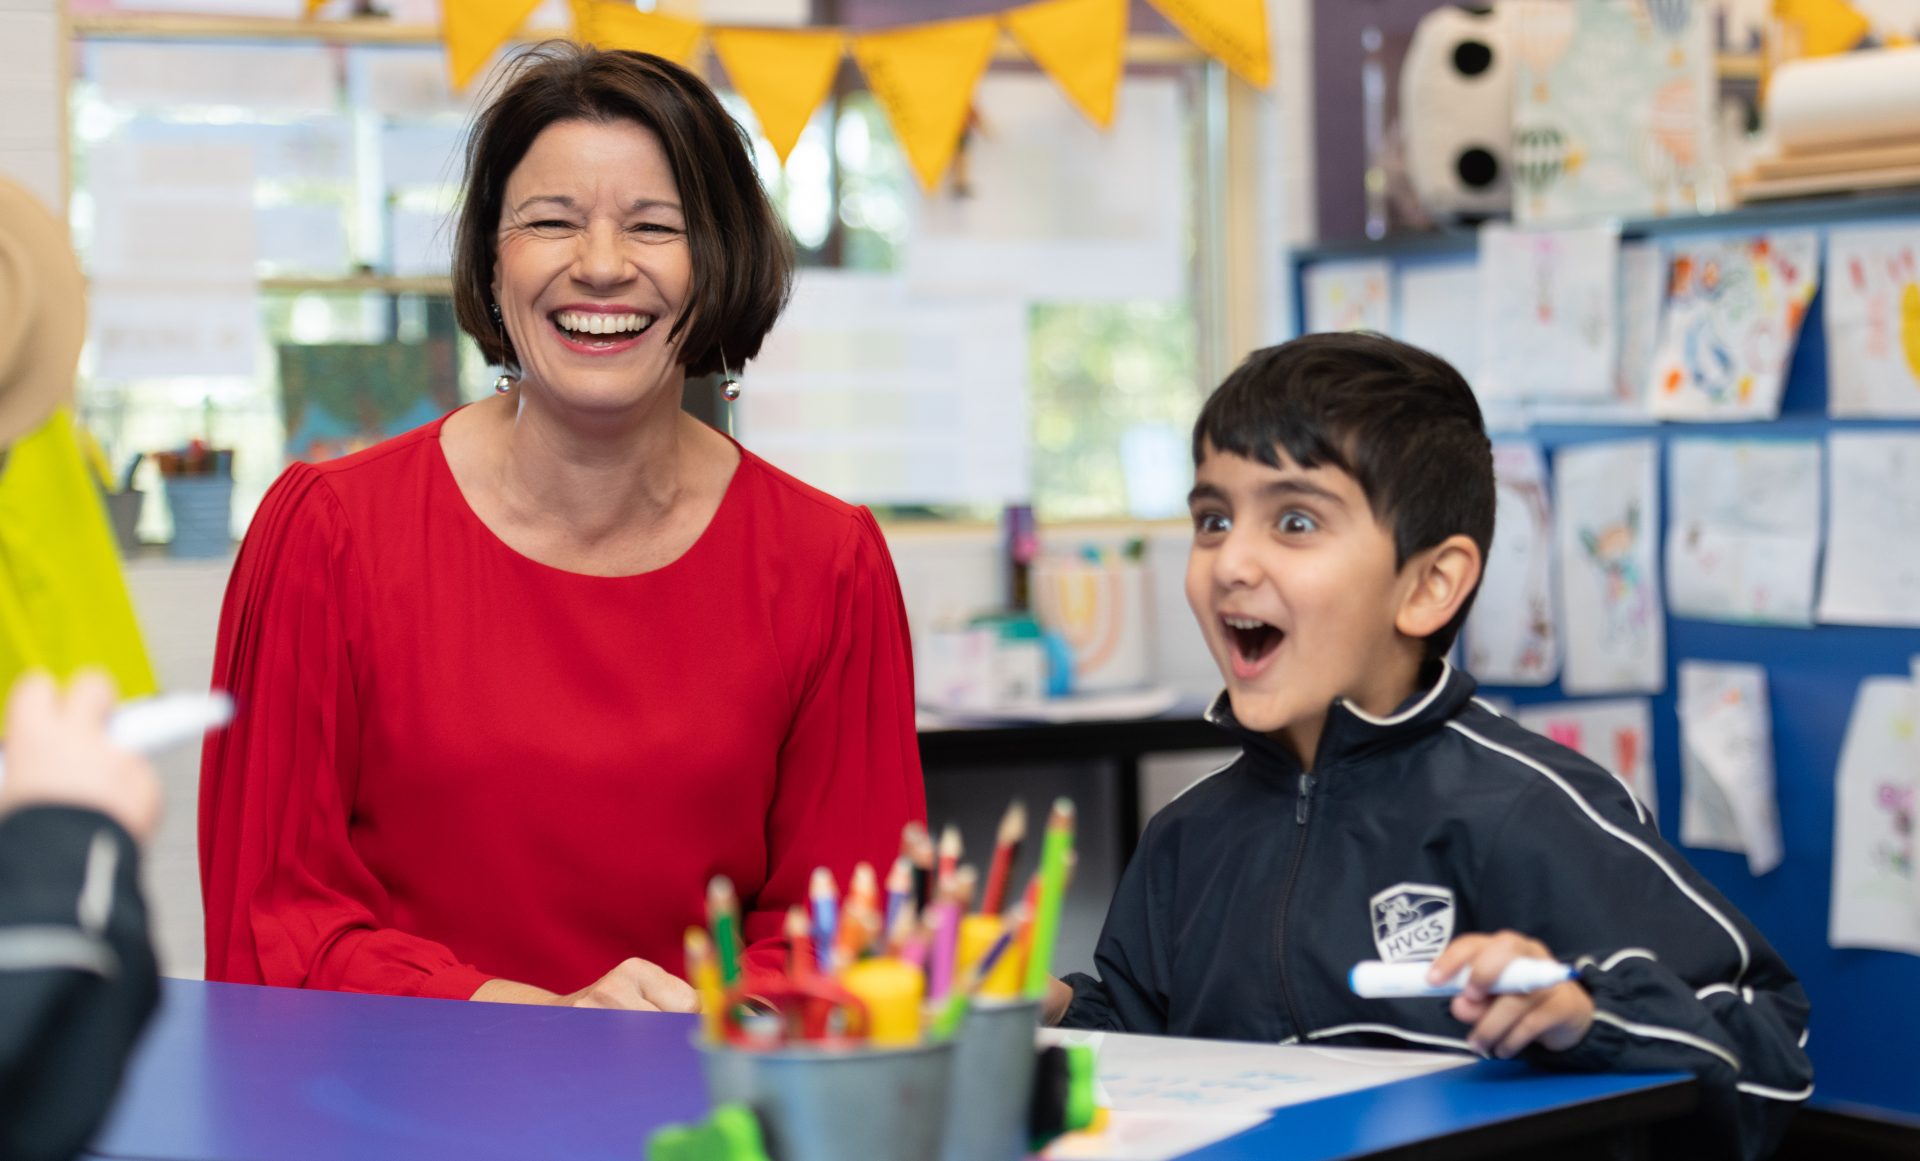 Teacher laughing with student